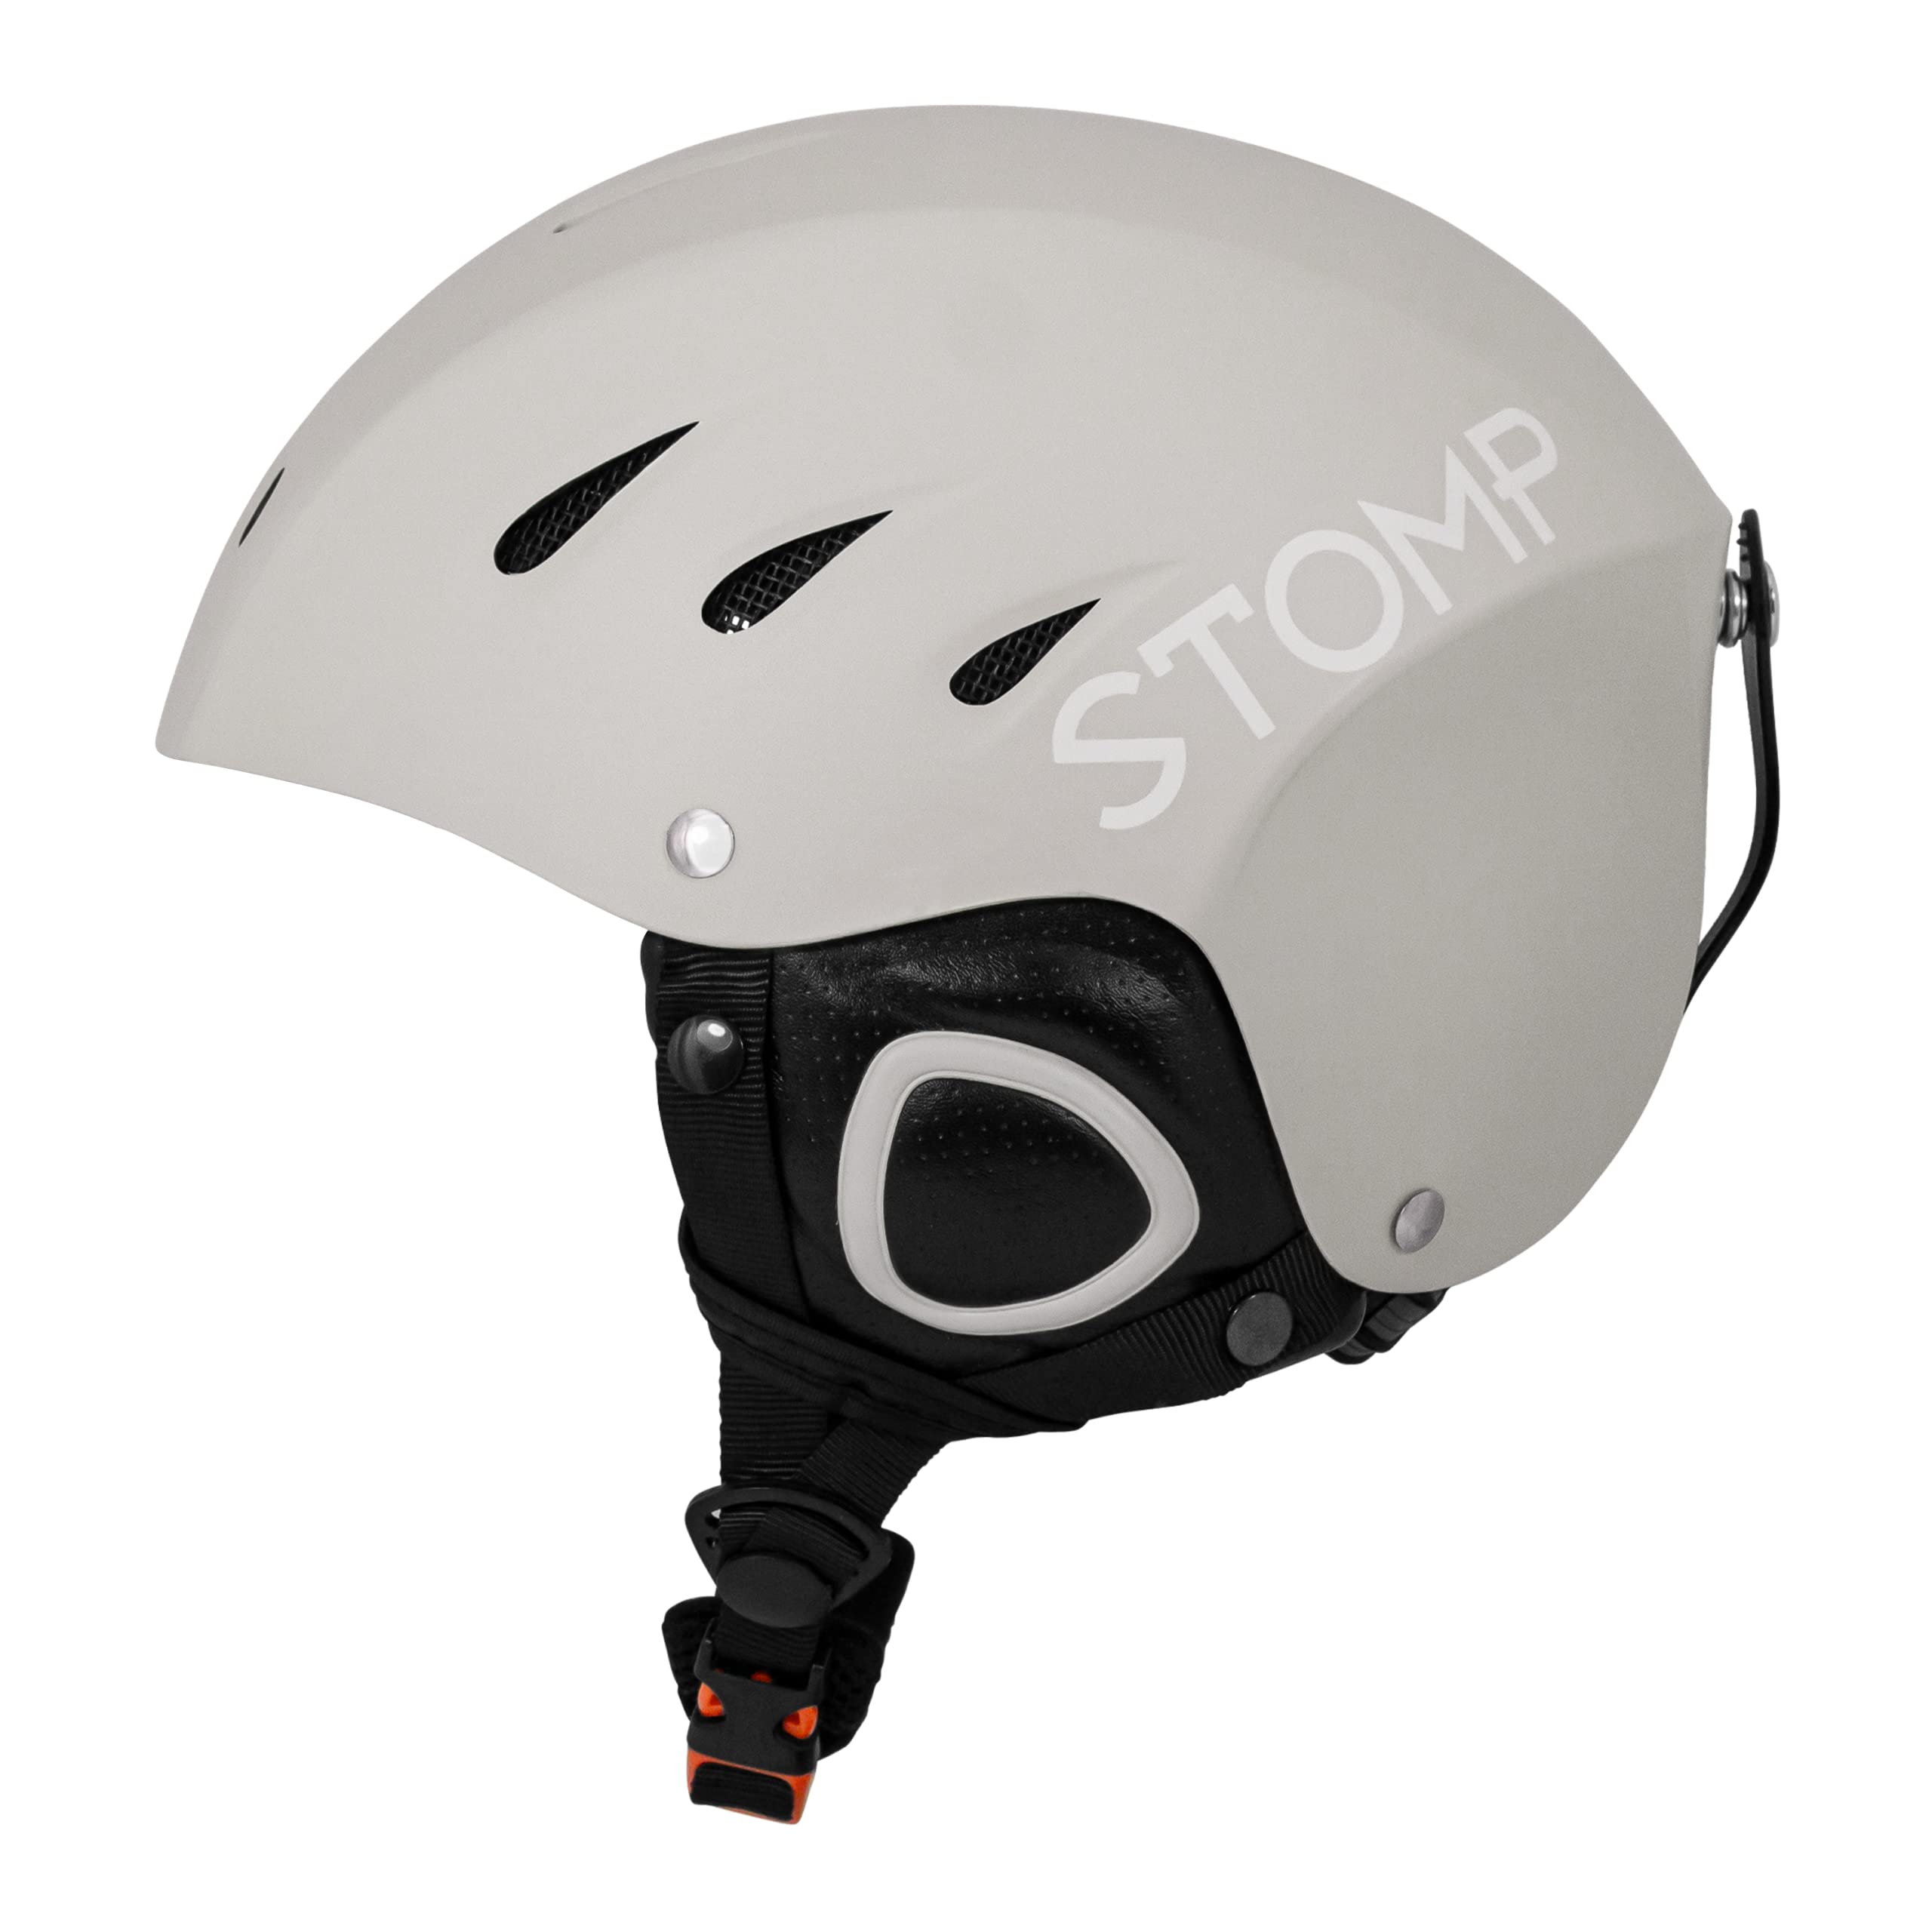 Stomp Ski Snowboarding Snow Sports Helmet With Build-In Pocket In Ear Pads For Wireless Drop-In Headphone (Matte Grey, Large)